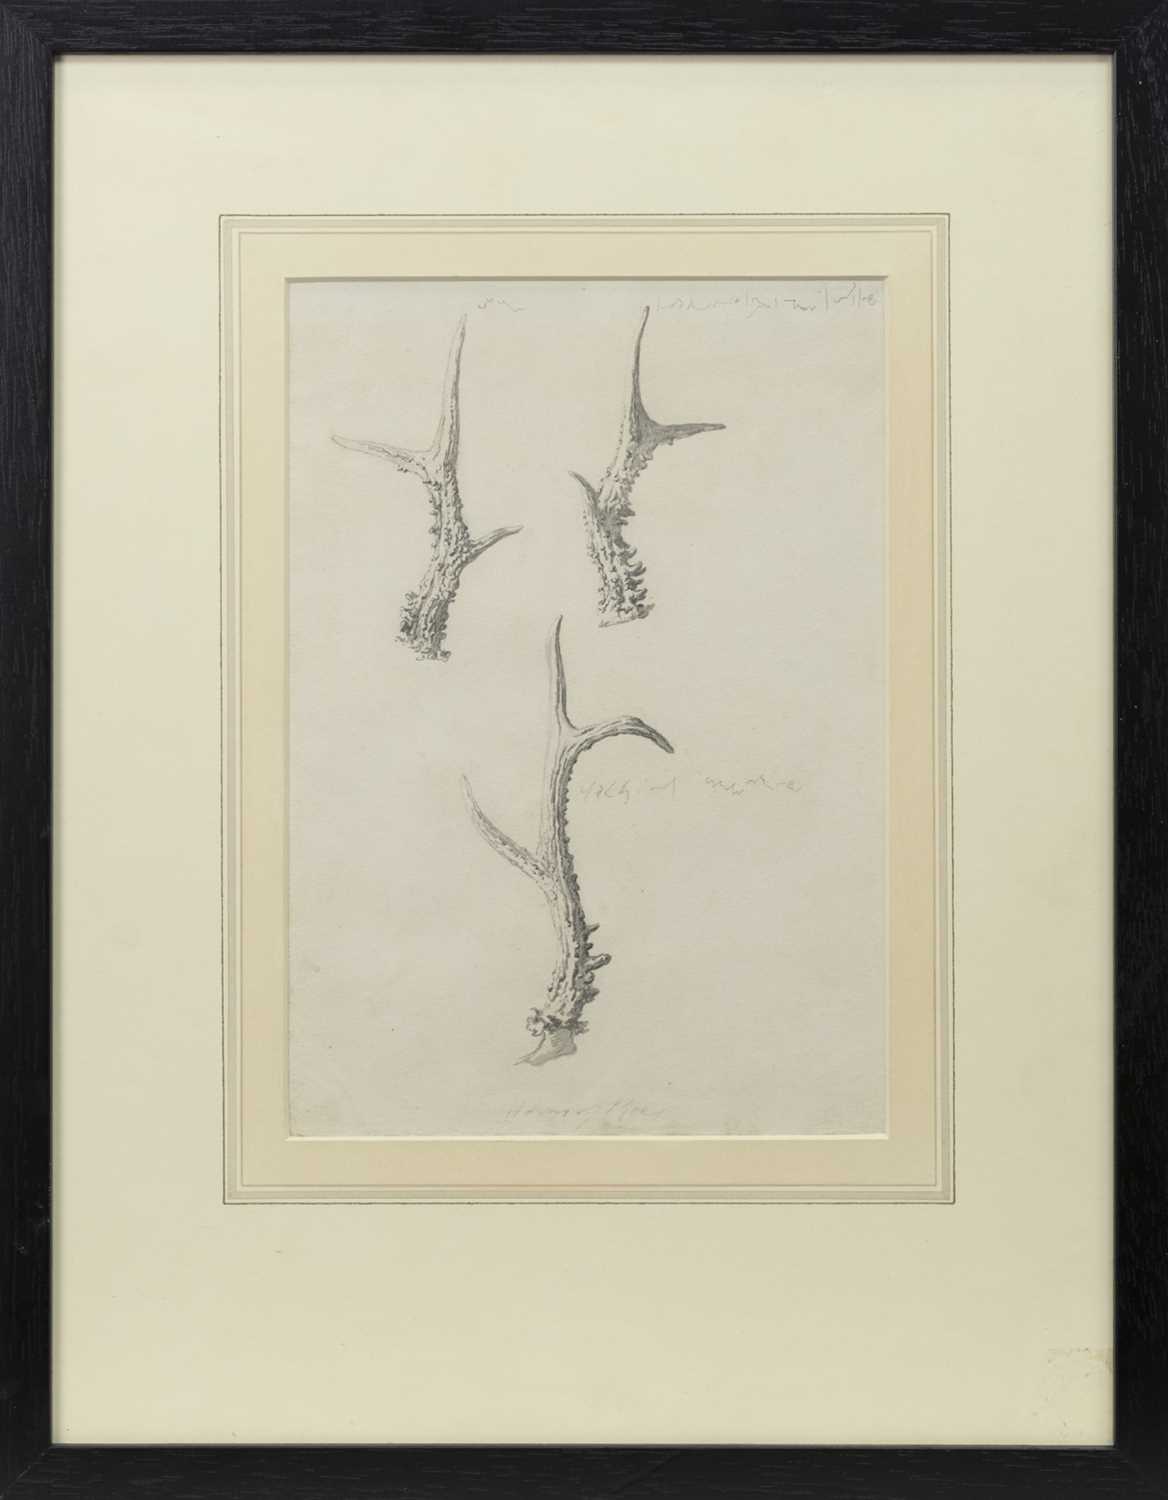 Lot 116 - ORGANIC STUDIES, A PENCIL SKETCH FROM THE CIRCLE OF GRAHAM VIVIAN SUTHERLAND